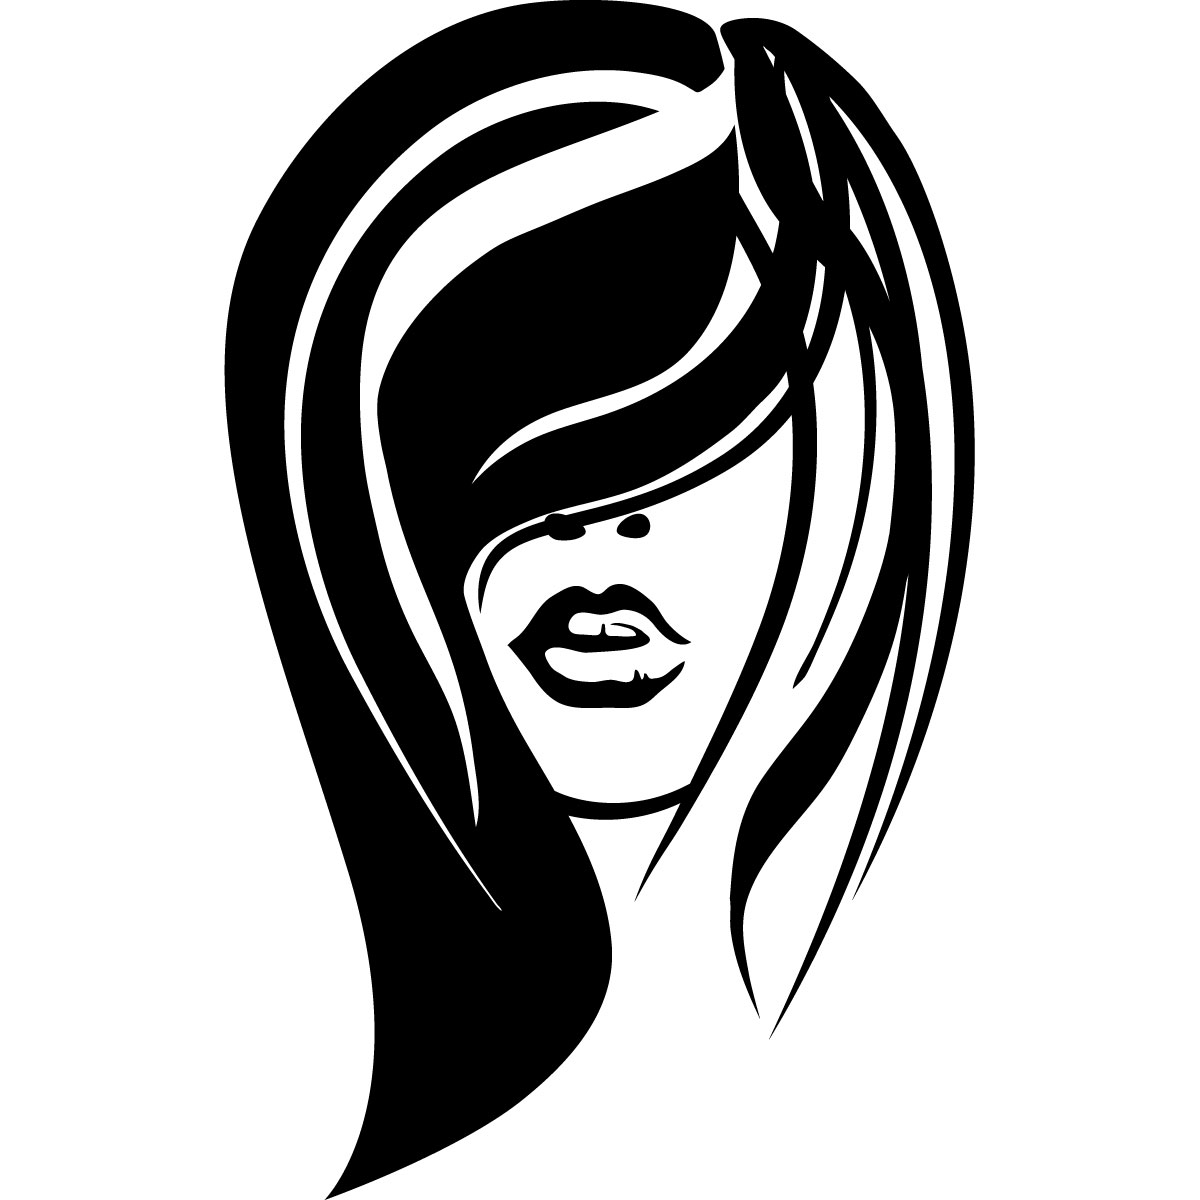 Wall decal girl face 2